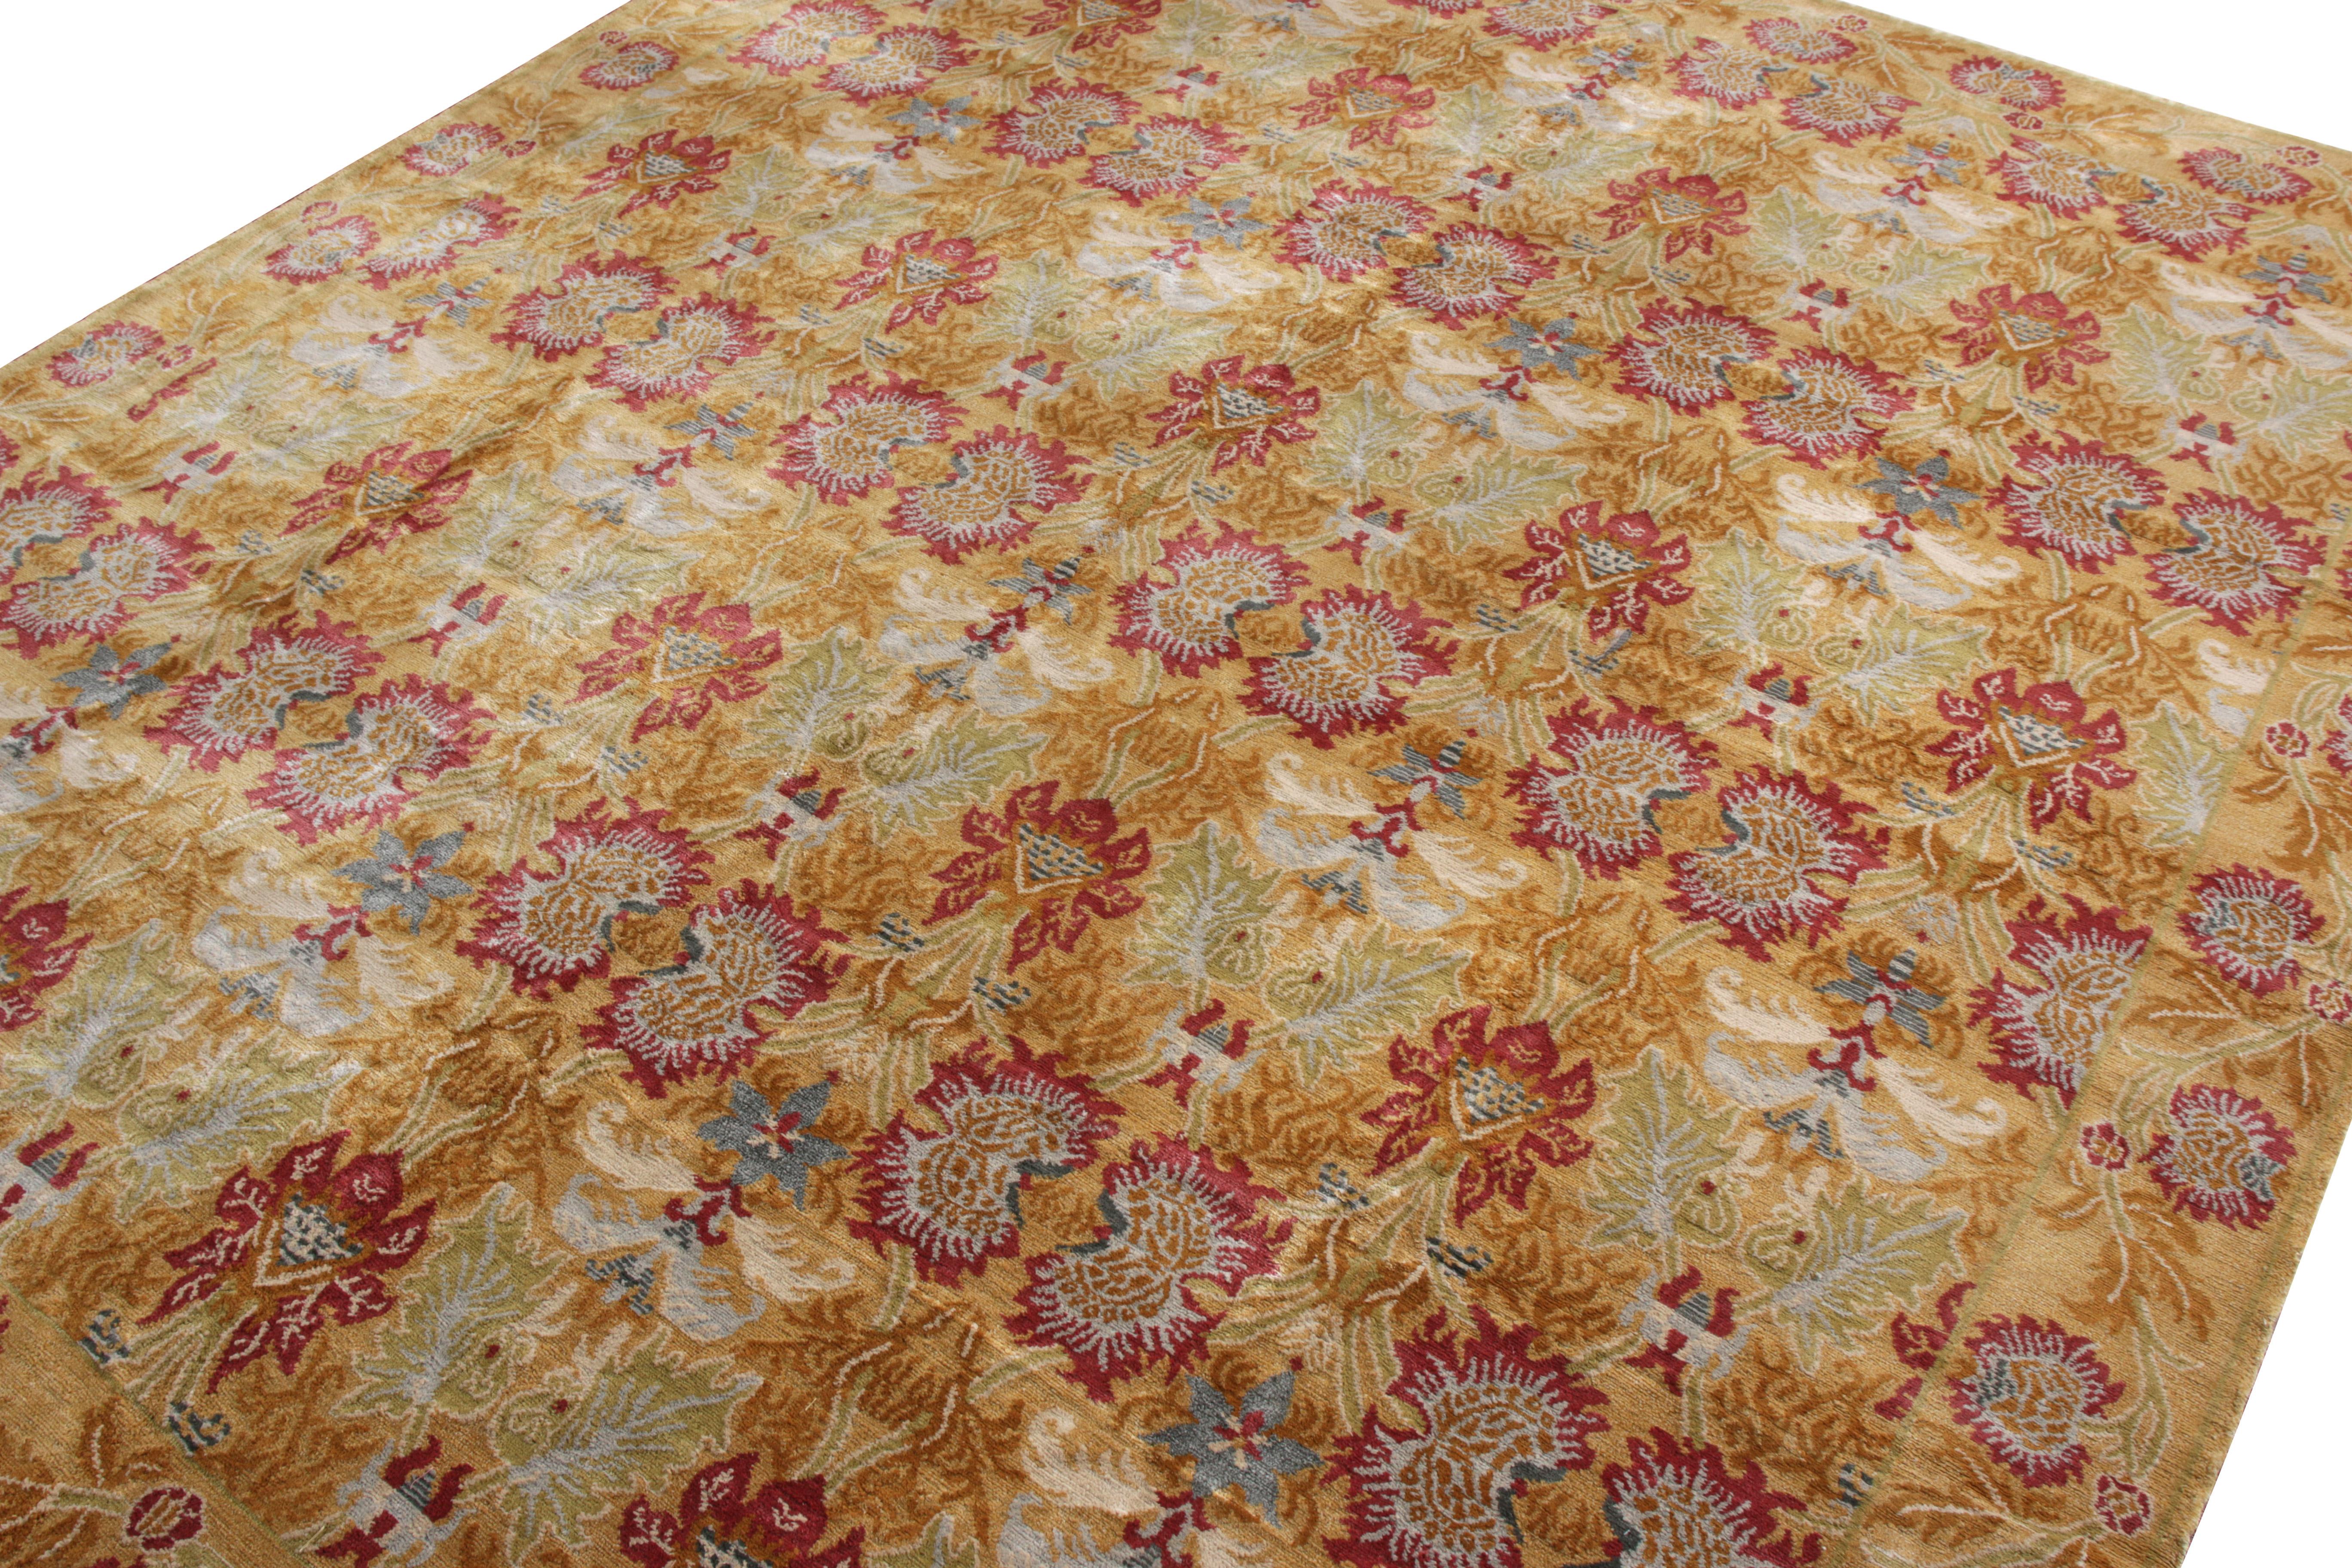 Spanish Rug & Kilim’s European Style Rug in Gold and Red Floral Pattern For Sale